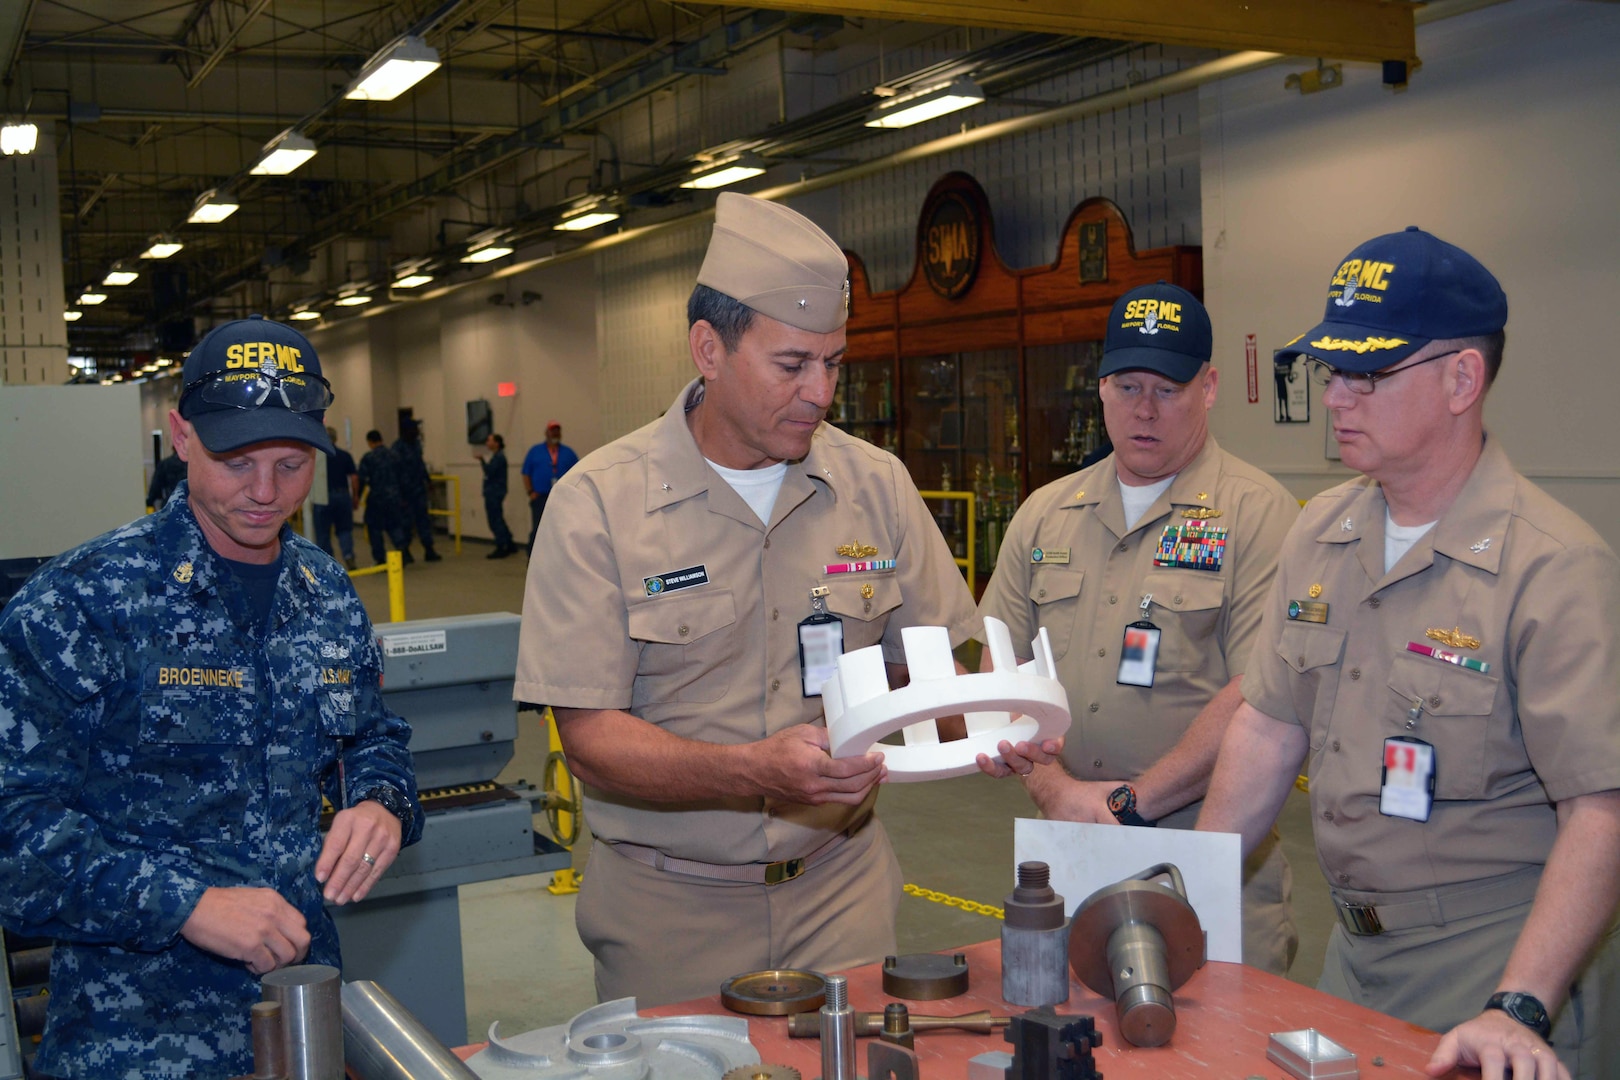 Machinery Repair Technician Chief Jason Broenneke, Capt. Dave Gombas and Lt. Cmdr. Keith Foster show examples of fabricated shipboard materiel to Rear Adm. Stephen F. Williamson. The examples were all fabricated by Sailors at Southeast Regional Maintenance Center (SERMC).  Rear Adm. Williamson toured the different production lines, shops and labs present at SERMC.